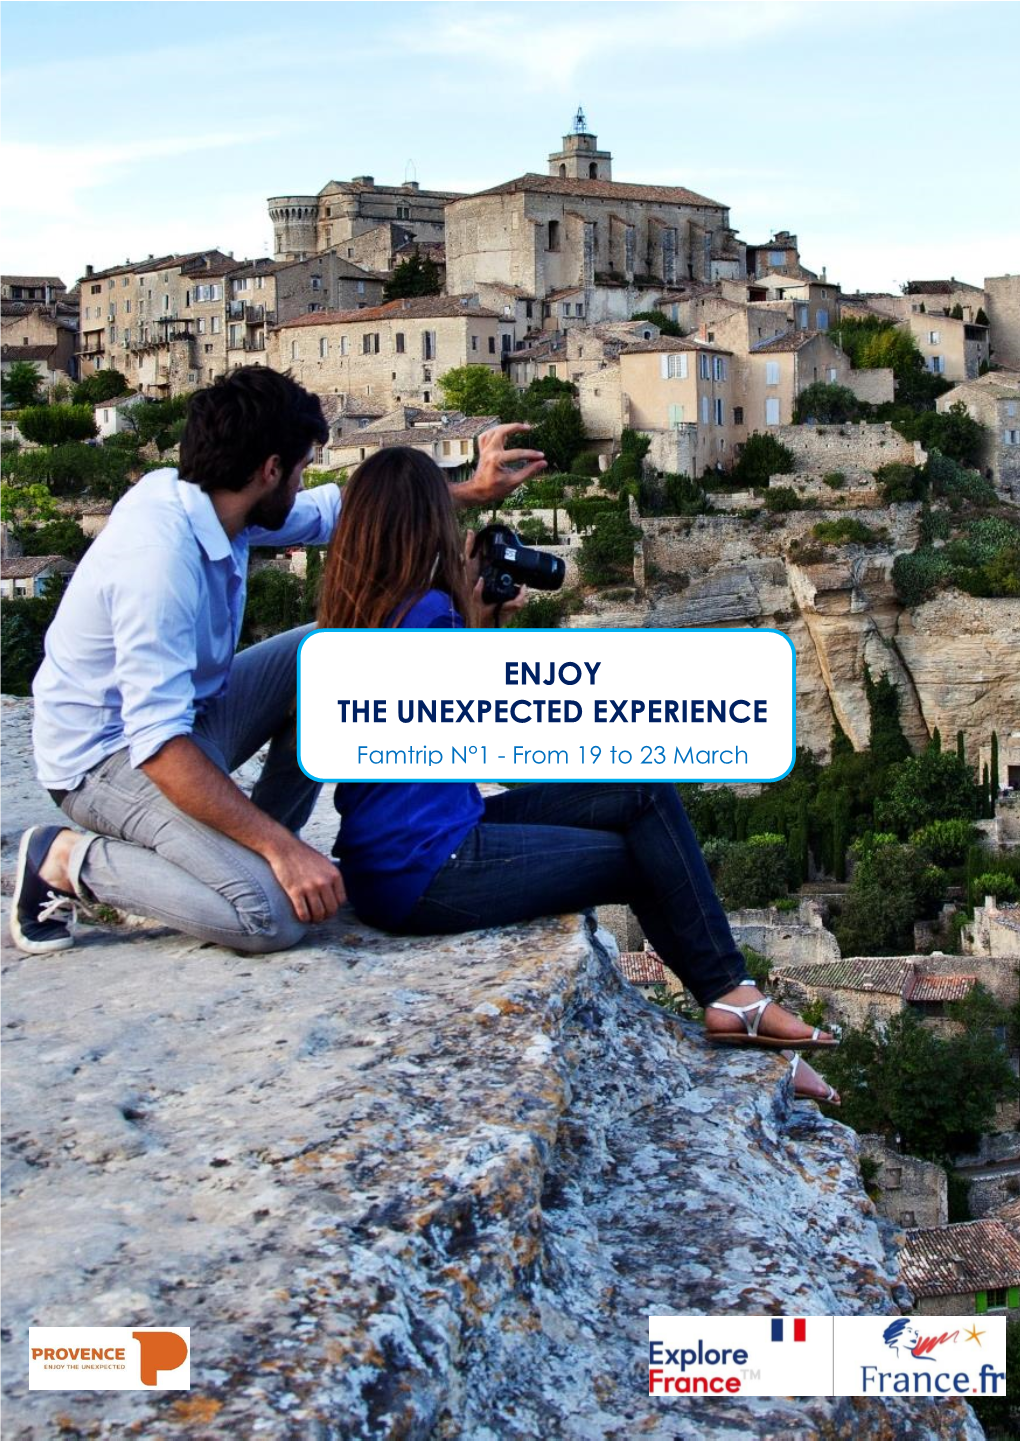 ENJOY the UNEXPECTED EXPERIENCE Famtrip N°1 - from 19 to 23 March 2020